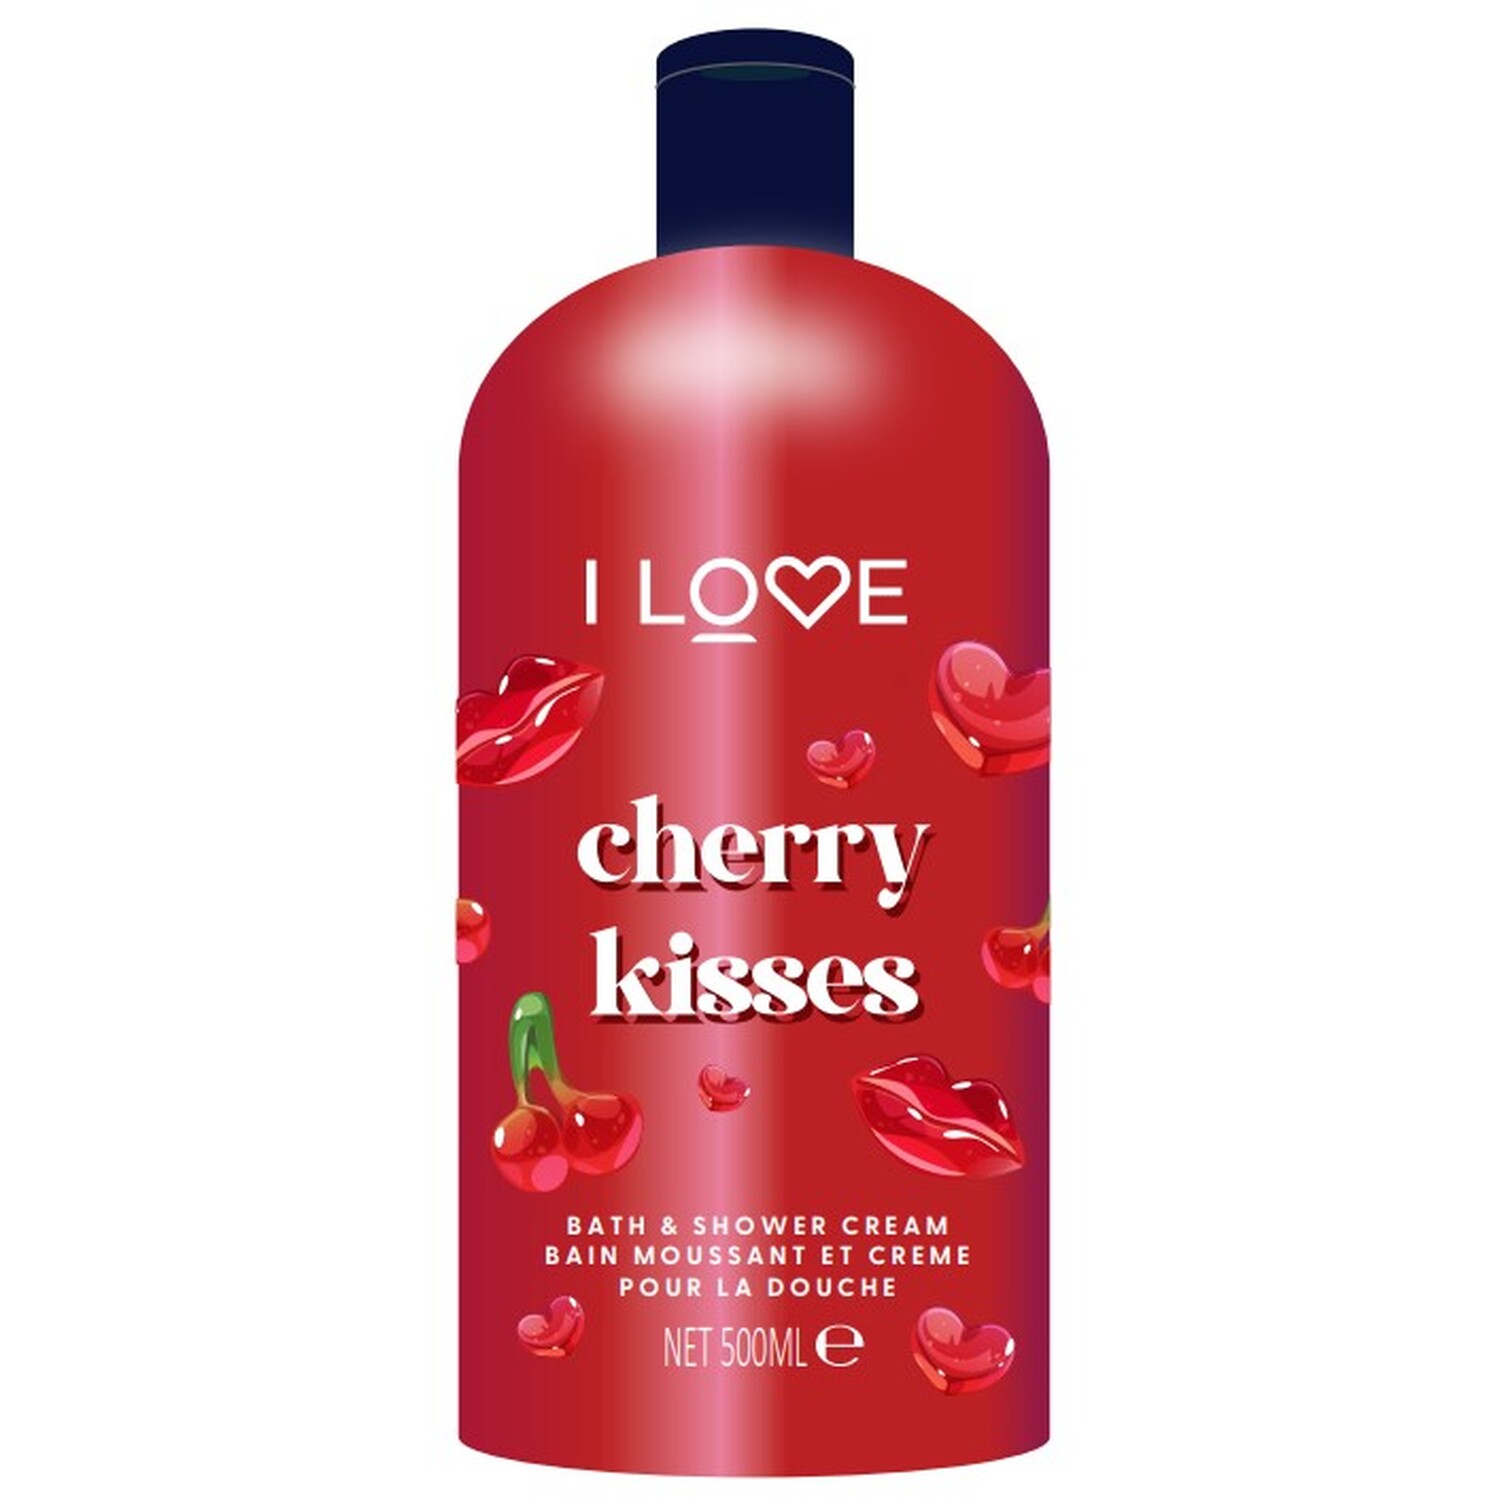 I Love Cherry Kisses Bath and Shower Cream - Red Image